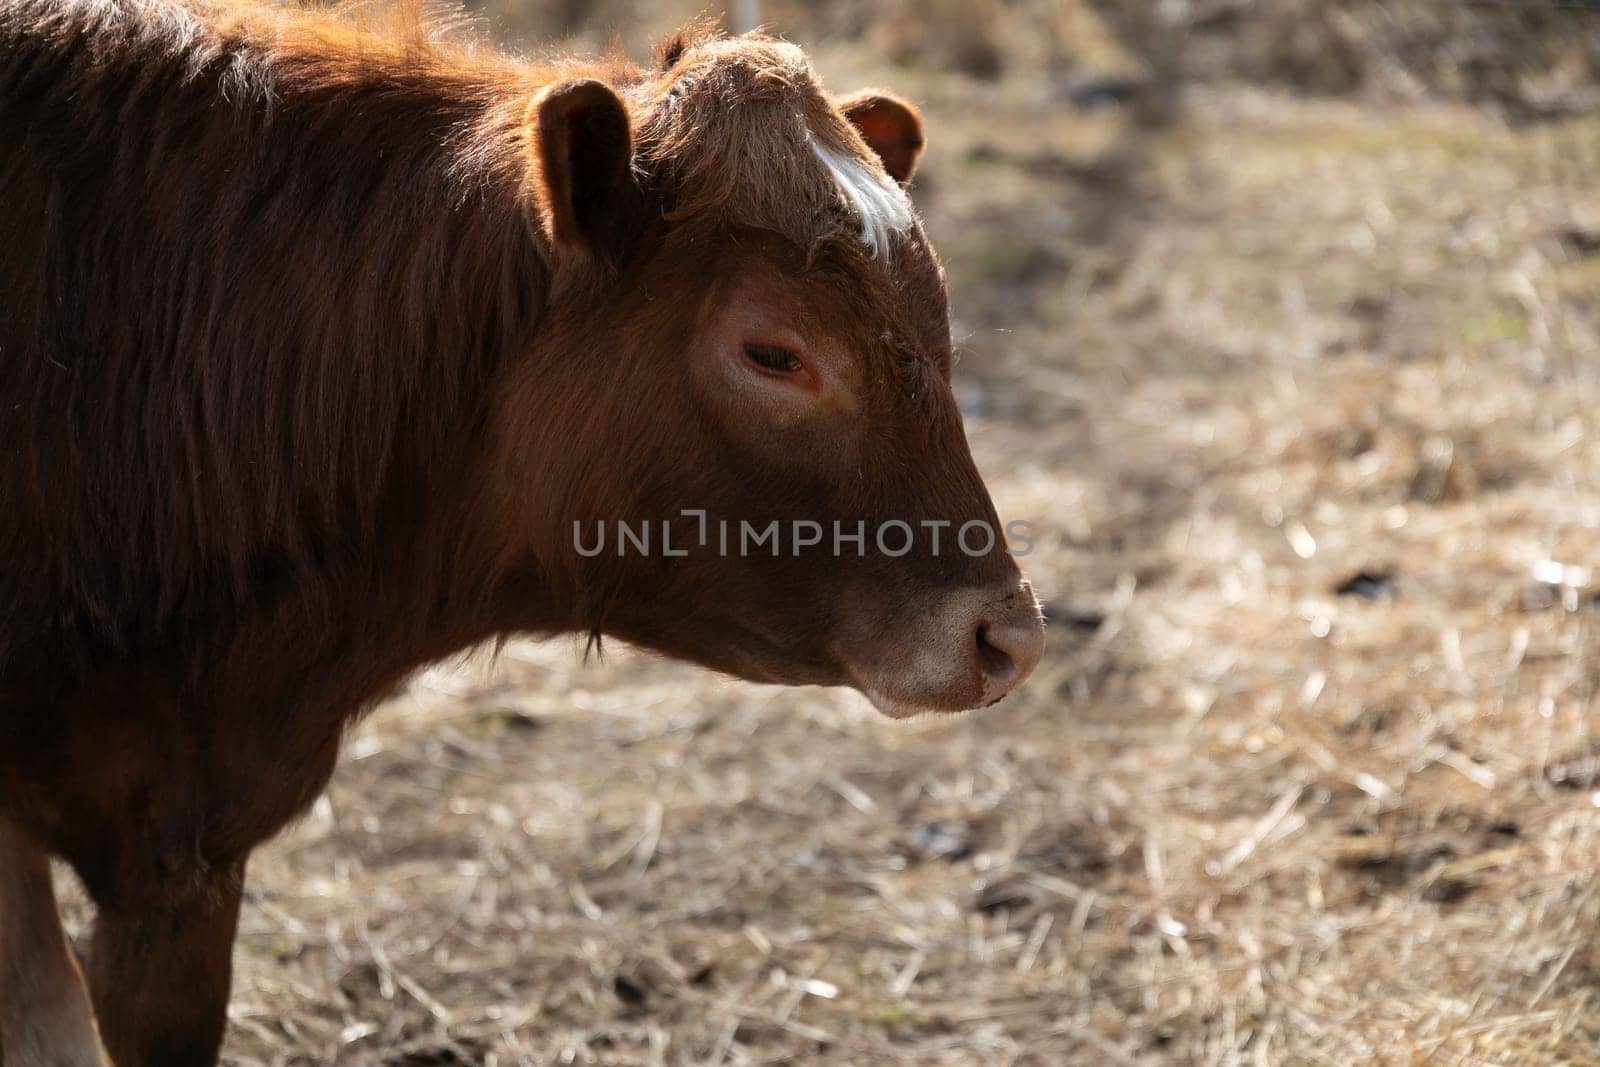 A brown cow is standing on top of a dry grass field. The cow appears to be grazing on the golden, parched grass in the field.